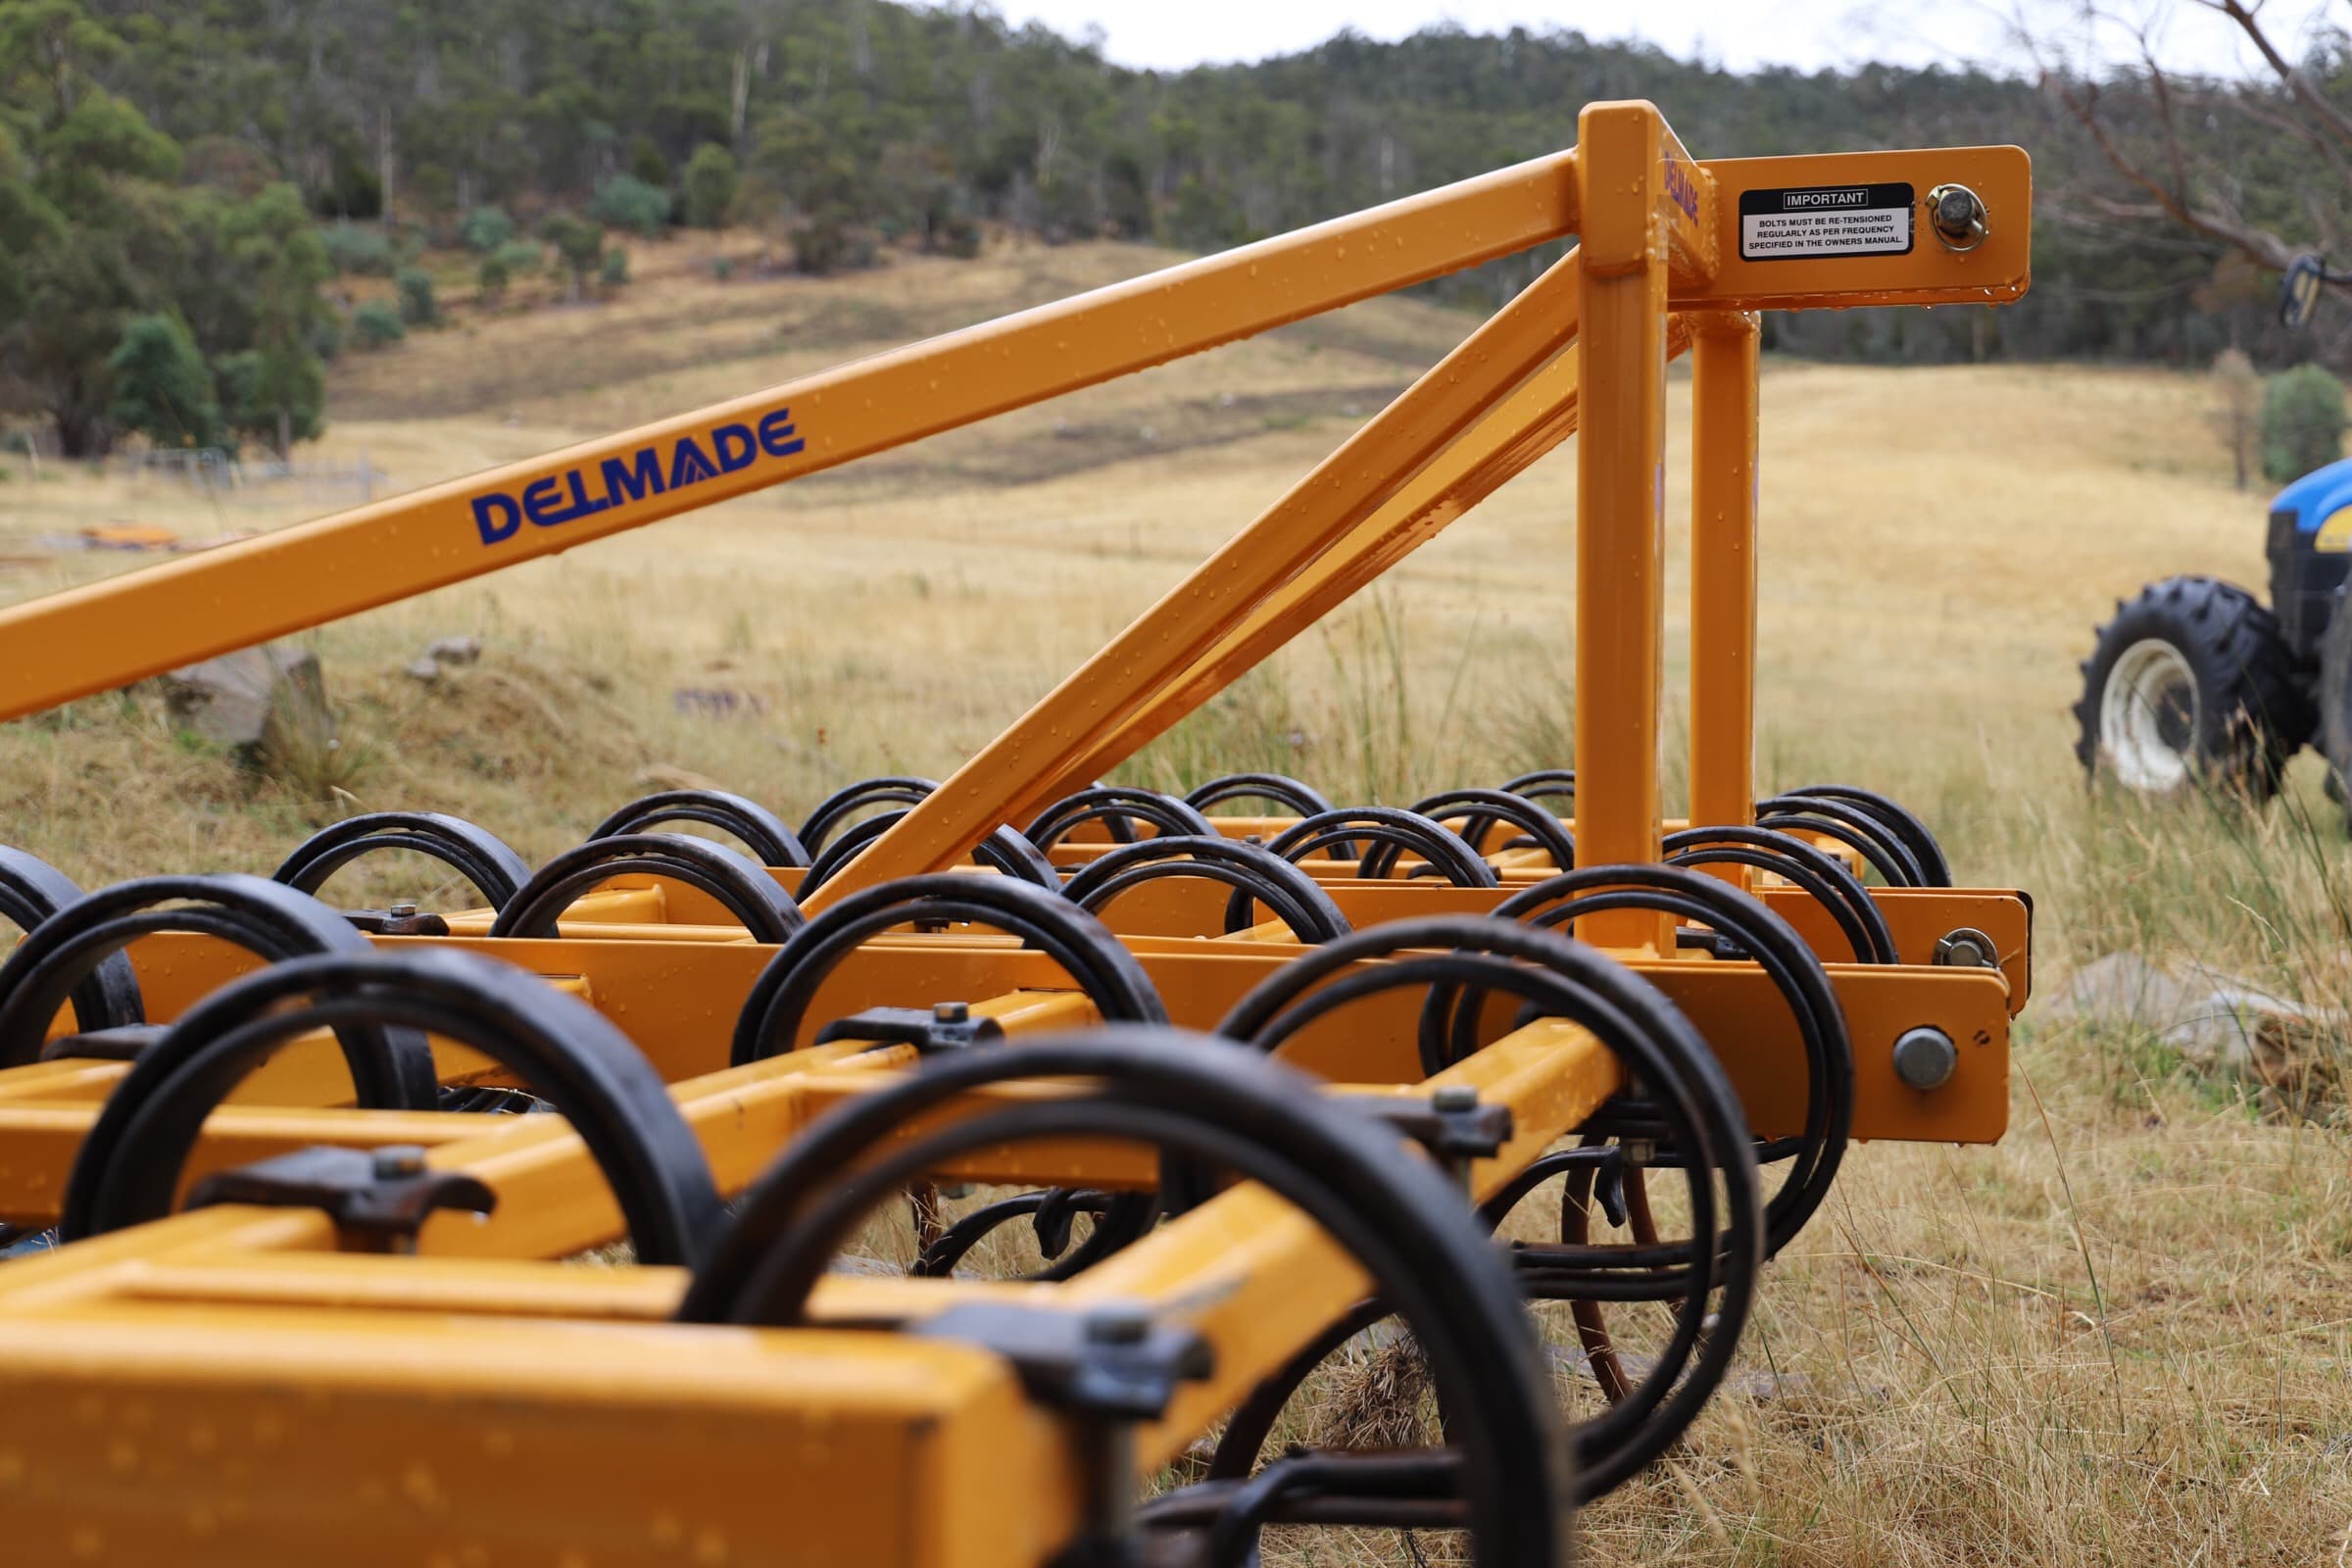 Delmade Photo Competition 2019 Winning Entry "Cultivator Medvale" by Sally Medwin  - Campania, Tasmania